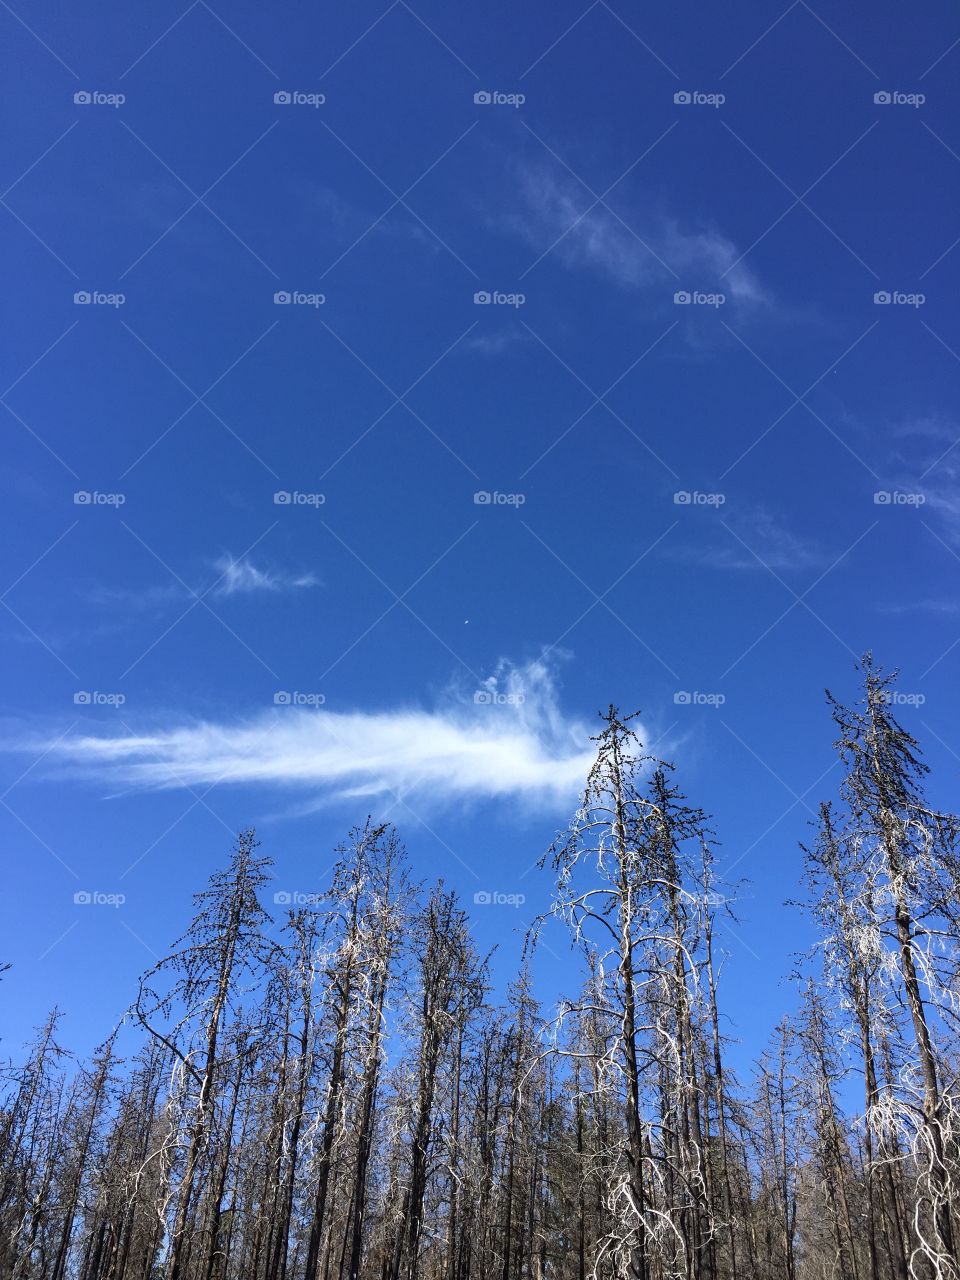 Angel Wing Cloud. Bright blue sky with a whispy white cloud and burned trees